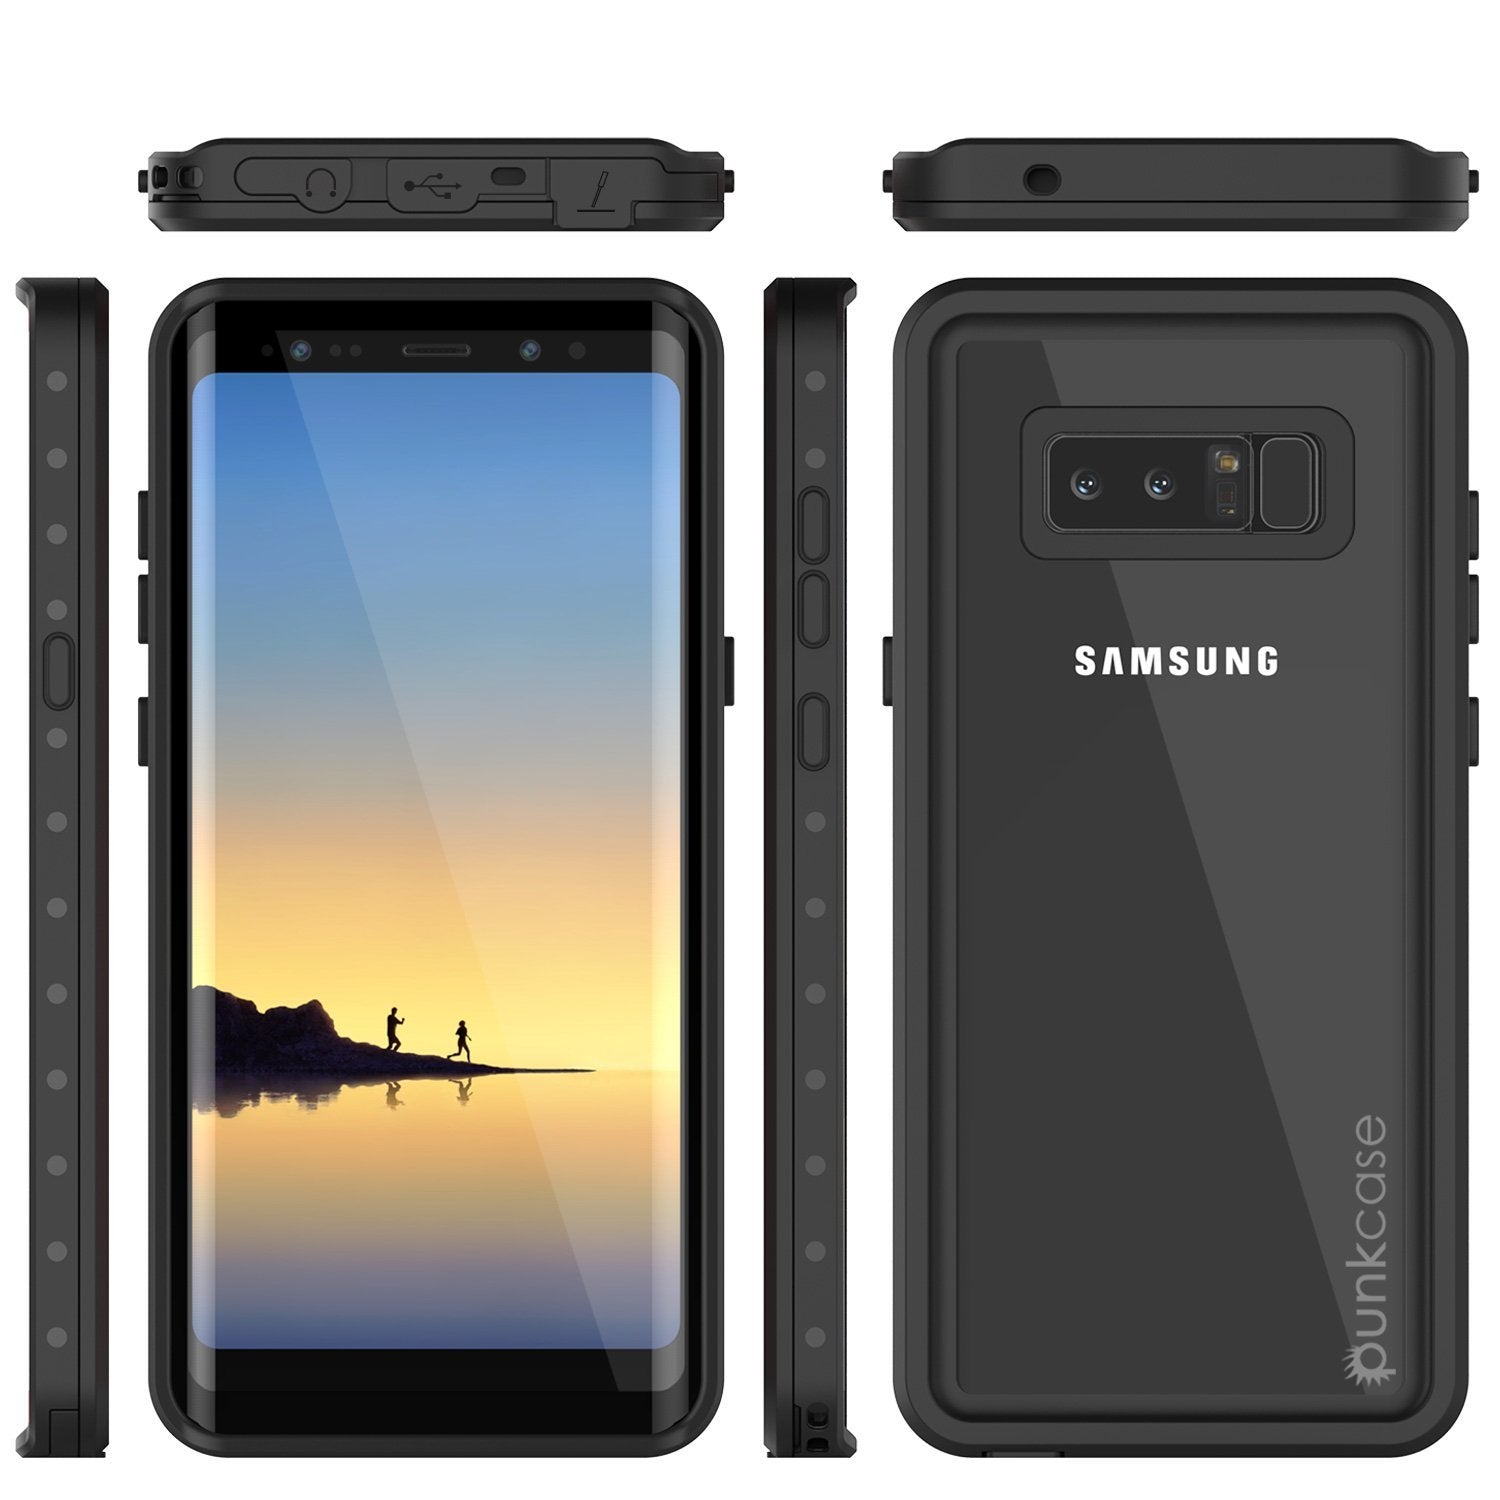 Galaxy Note 8 Waterproof case, StudStar Series Armor Cover, [CLEAR]